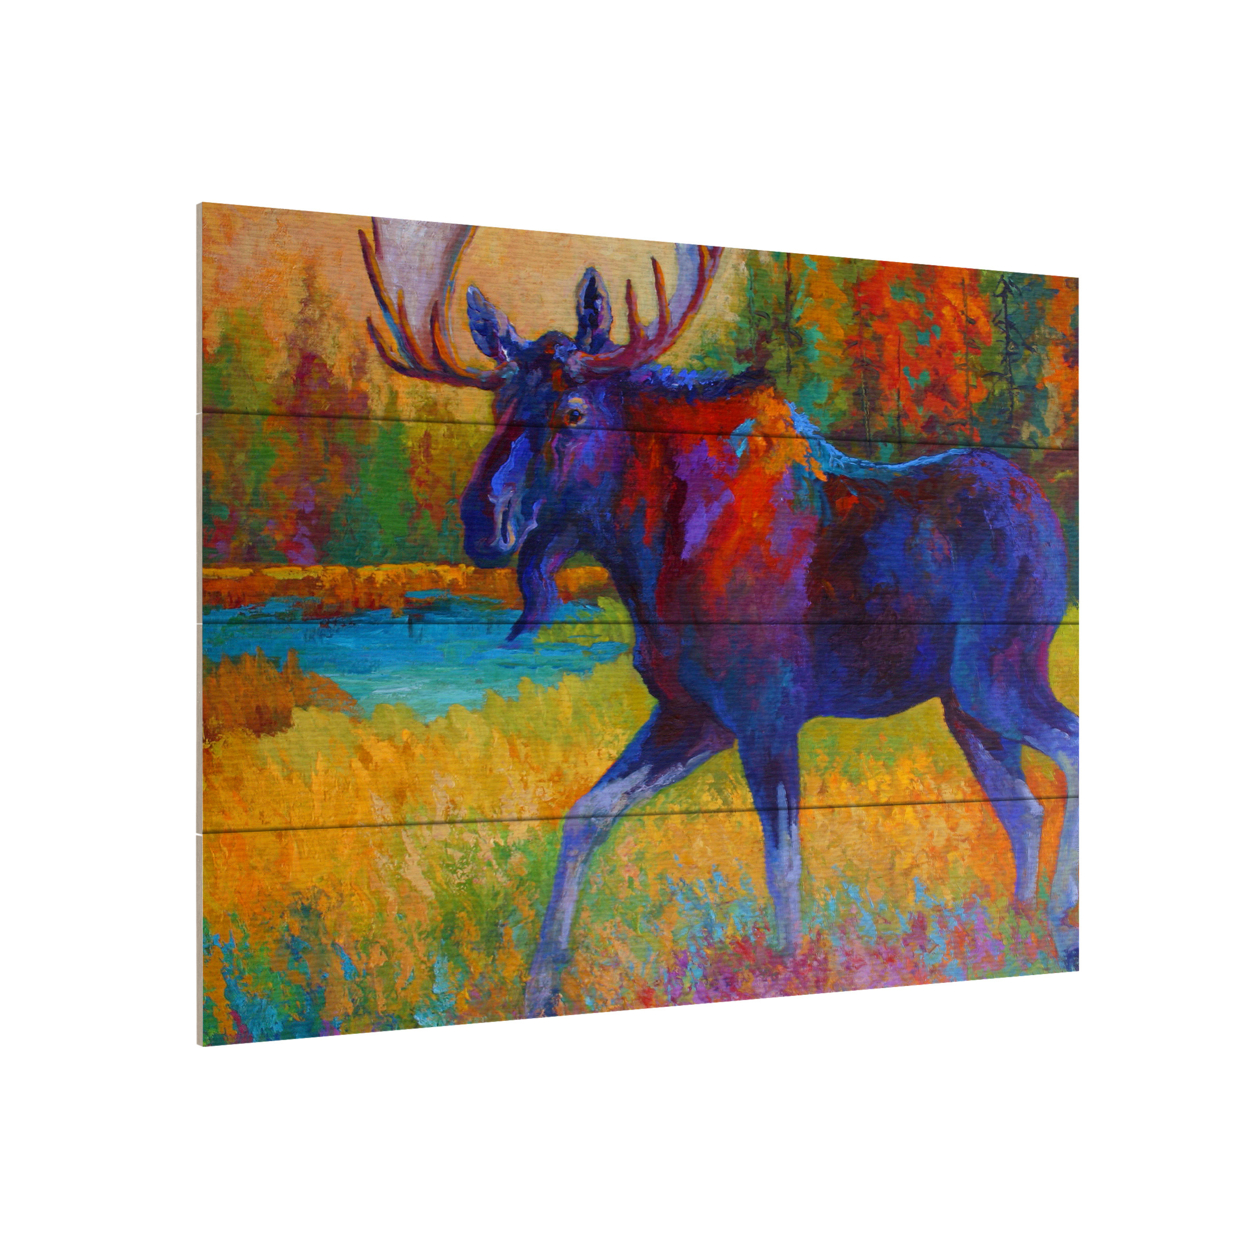 Wall Art 12 X 16 Inches Titled Majestic Moose Ready To Hang Printed On Wooden Planks